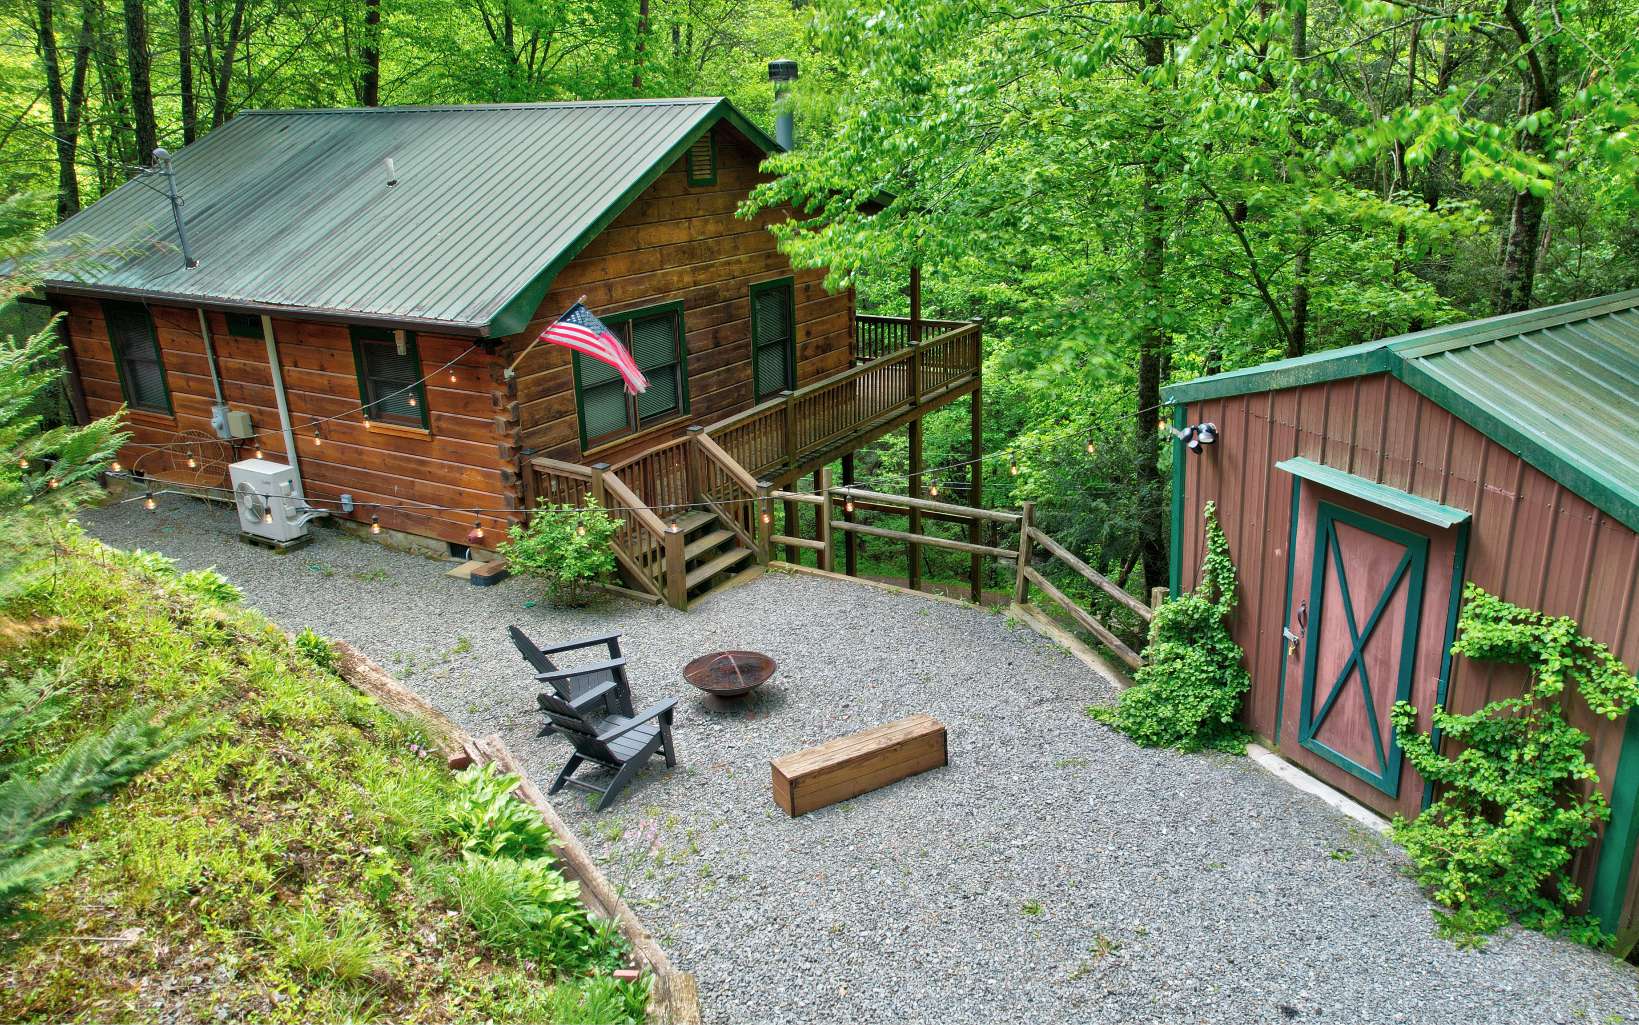 Do you Dream of Sitting on the Porch of your very own Cabin in the Woods, Listening to a Noisy Mountain Stream? This is IT! Cute as a Button and Neat as a Pin. This Fully Furnished, Turnkey Cabin overlooking Noisy Laurel Creek checks all the boxes! So close to Blue Ridge and Ellijay and bordering 200+ ft of the Benton MacKaye Trail. Perfect for Hikers, Nature Lovers, and Mountain Enthusiasts. Immaculately Kept with High End Furnishings, Smart Electronics, and All New Stainless Steel Appliances. You won’t find another Cabin that’s Cleaner or more Updated. Better than New - Everything has been Replaced right down to the Door Knobs, Outlets, and Light Switches. Established, Active Airbnb Property with 5 Star Reviews and 2K Instagram Followers. Ask for List of Upgrades, Too Many to List Here.